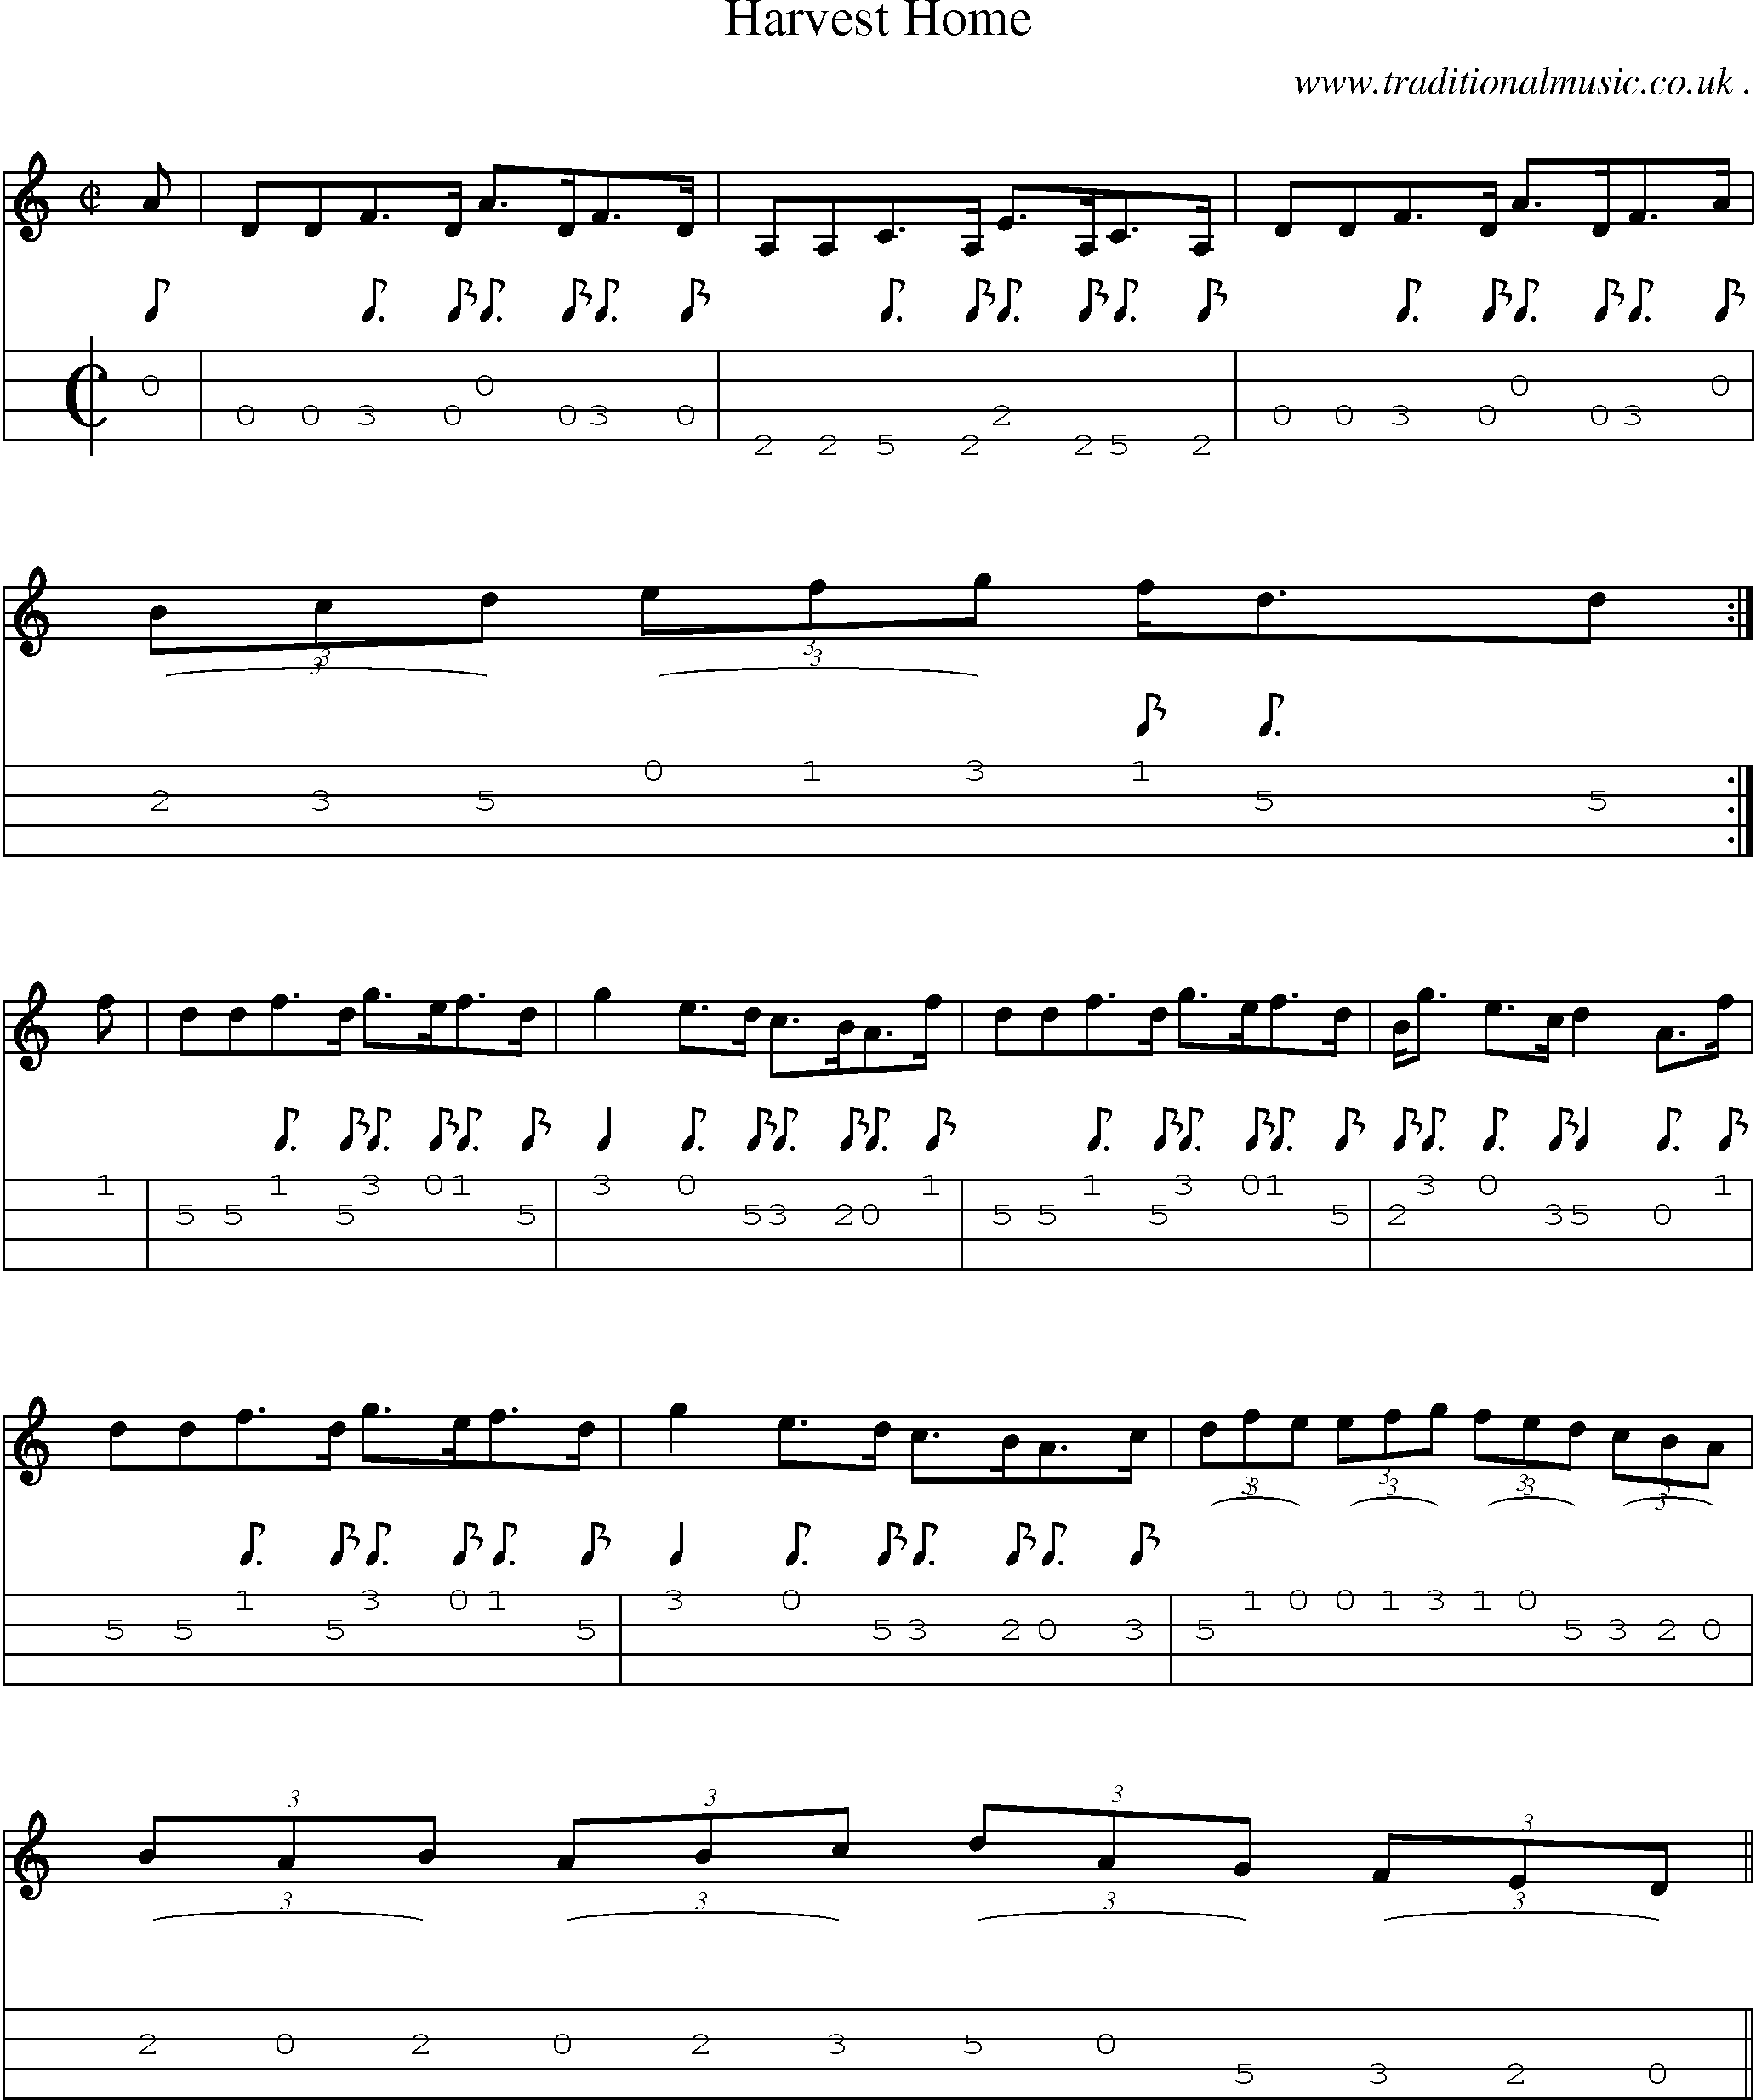 Sheet-music  score, Chords and Mandolin Tabs for Harvest Home